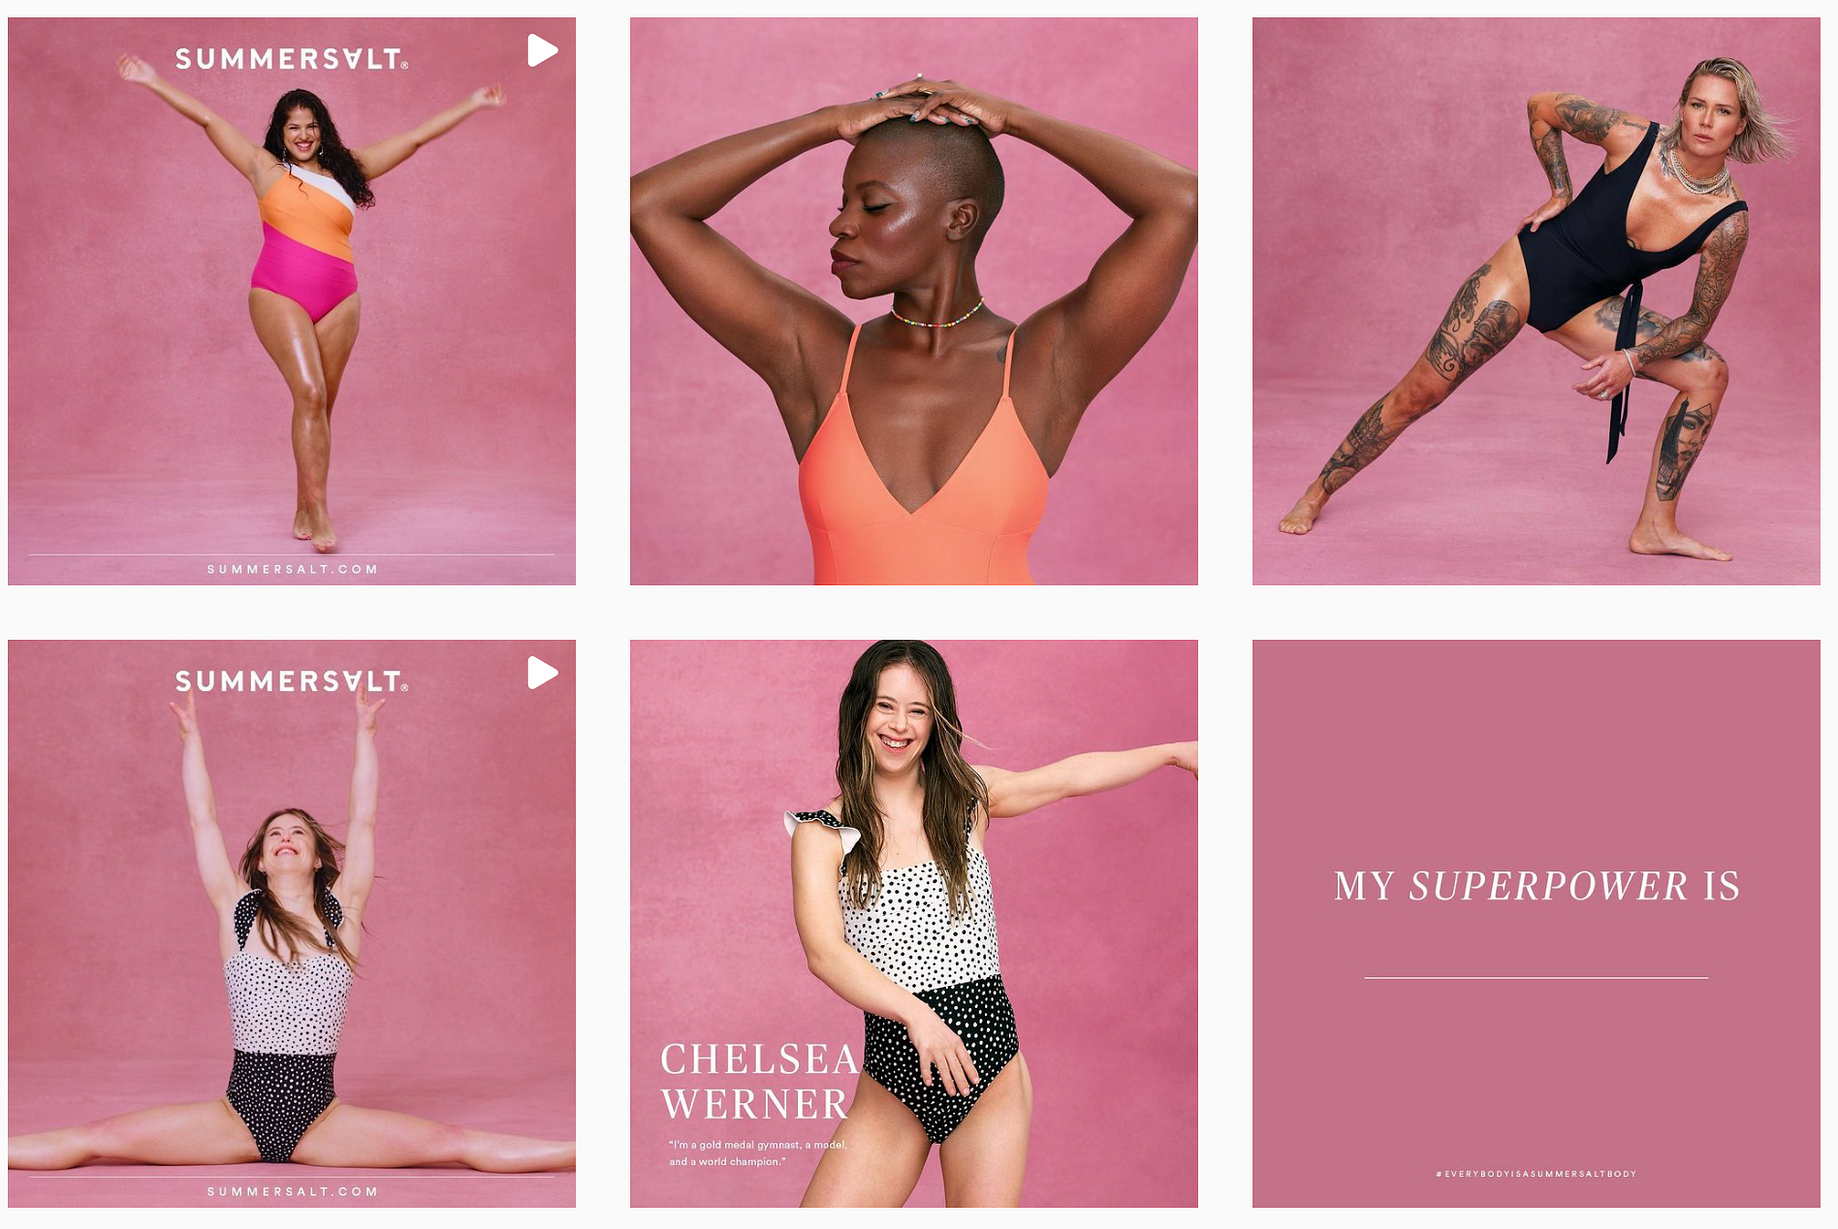 No, You're Crying Over a Swimsuit Catalog | by Brittany Jezouit | Better  Marketing